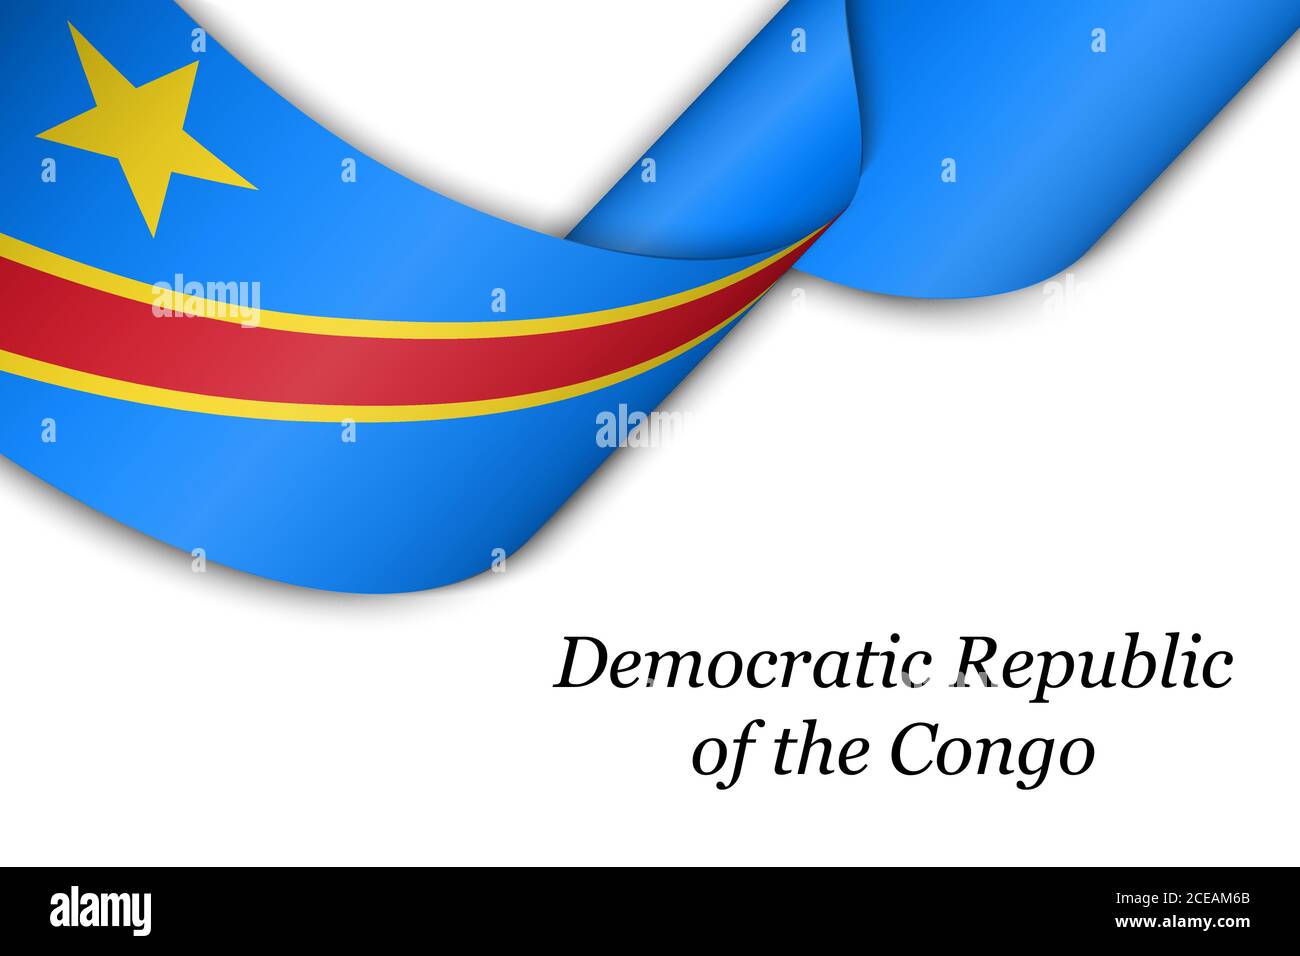 Flag of congo republic Stock Vector Images - Alamy